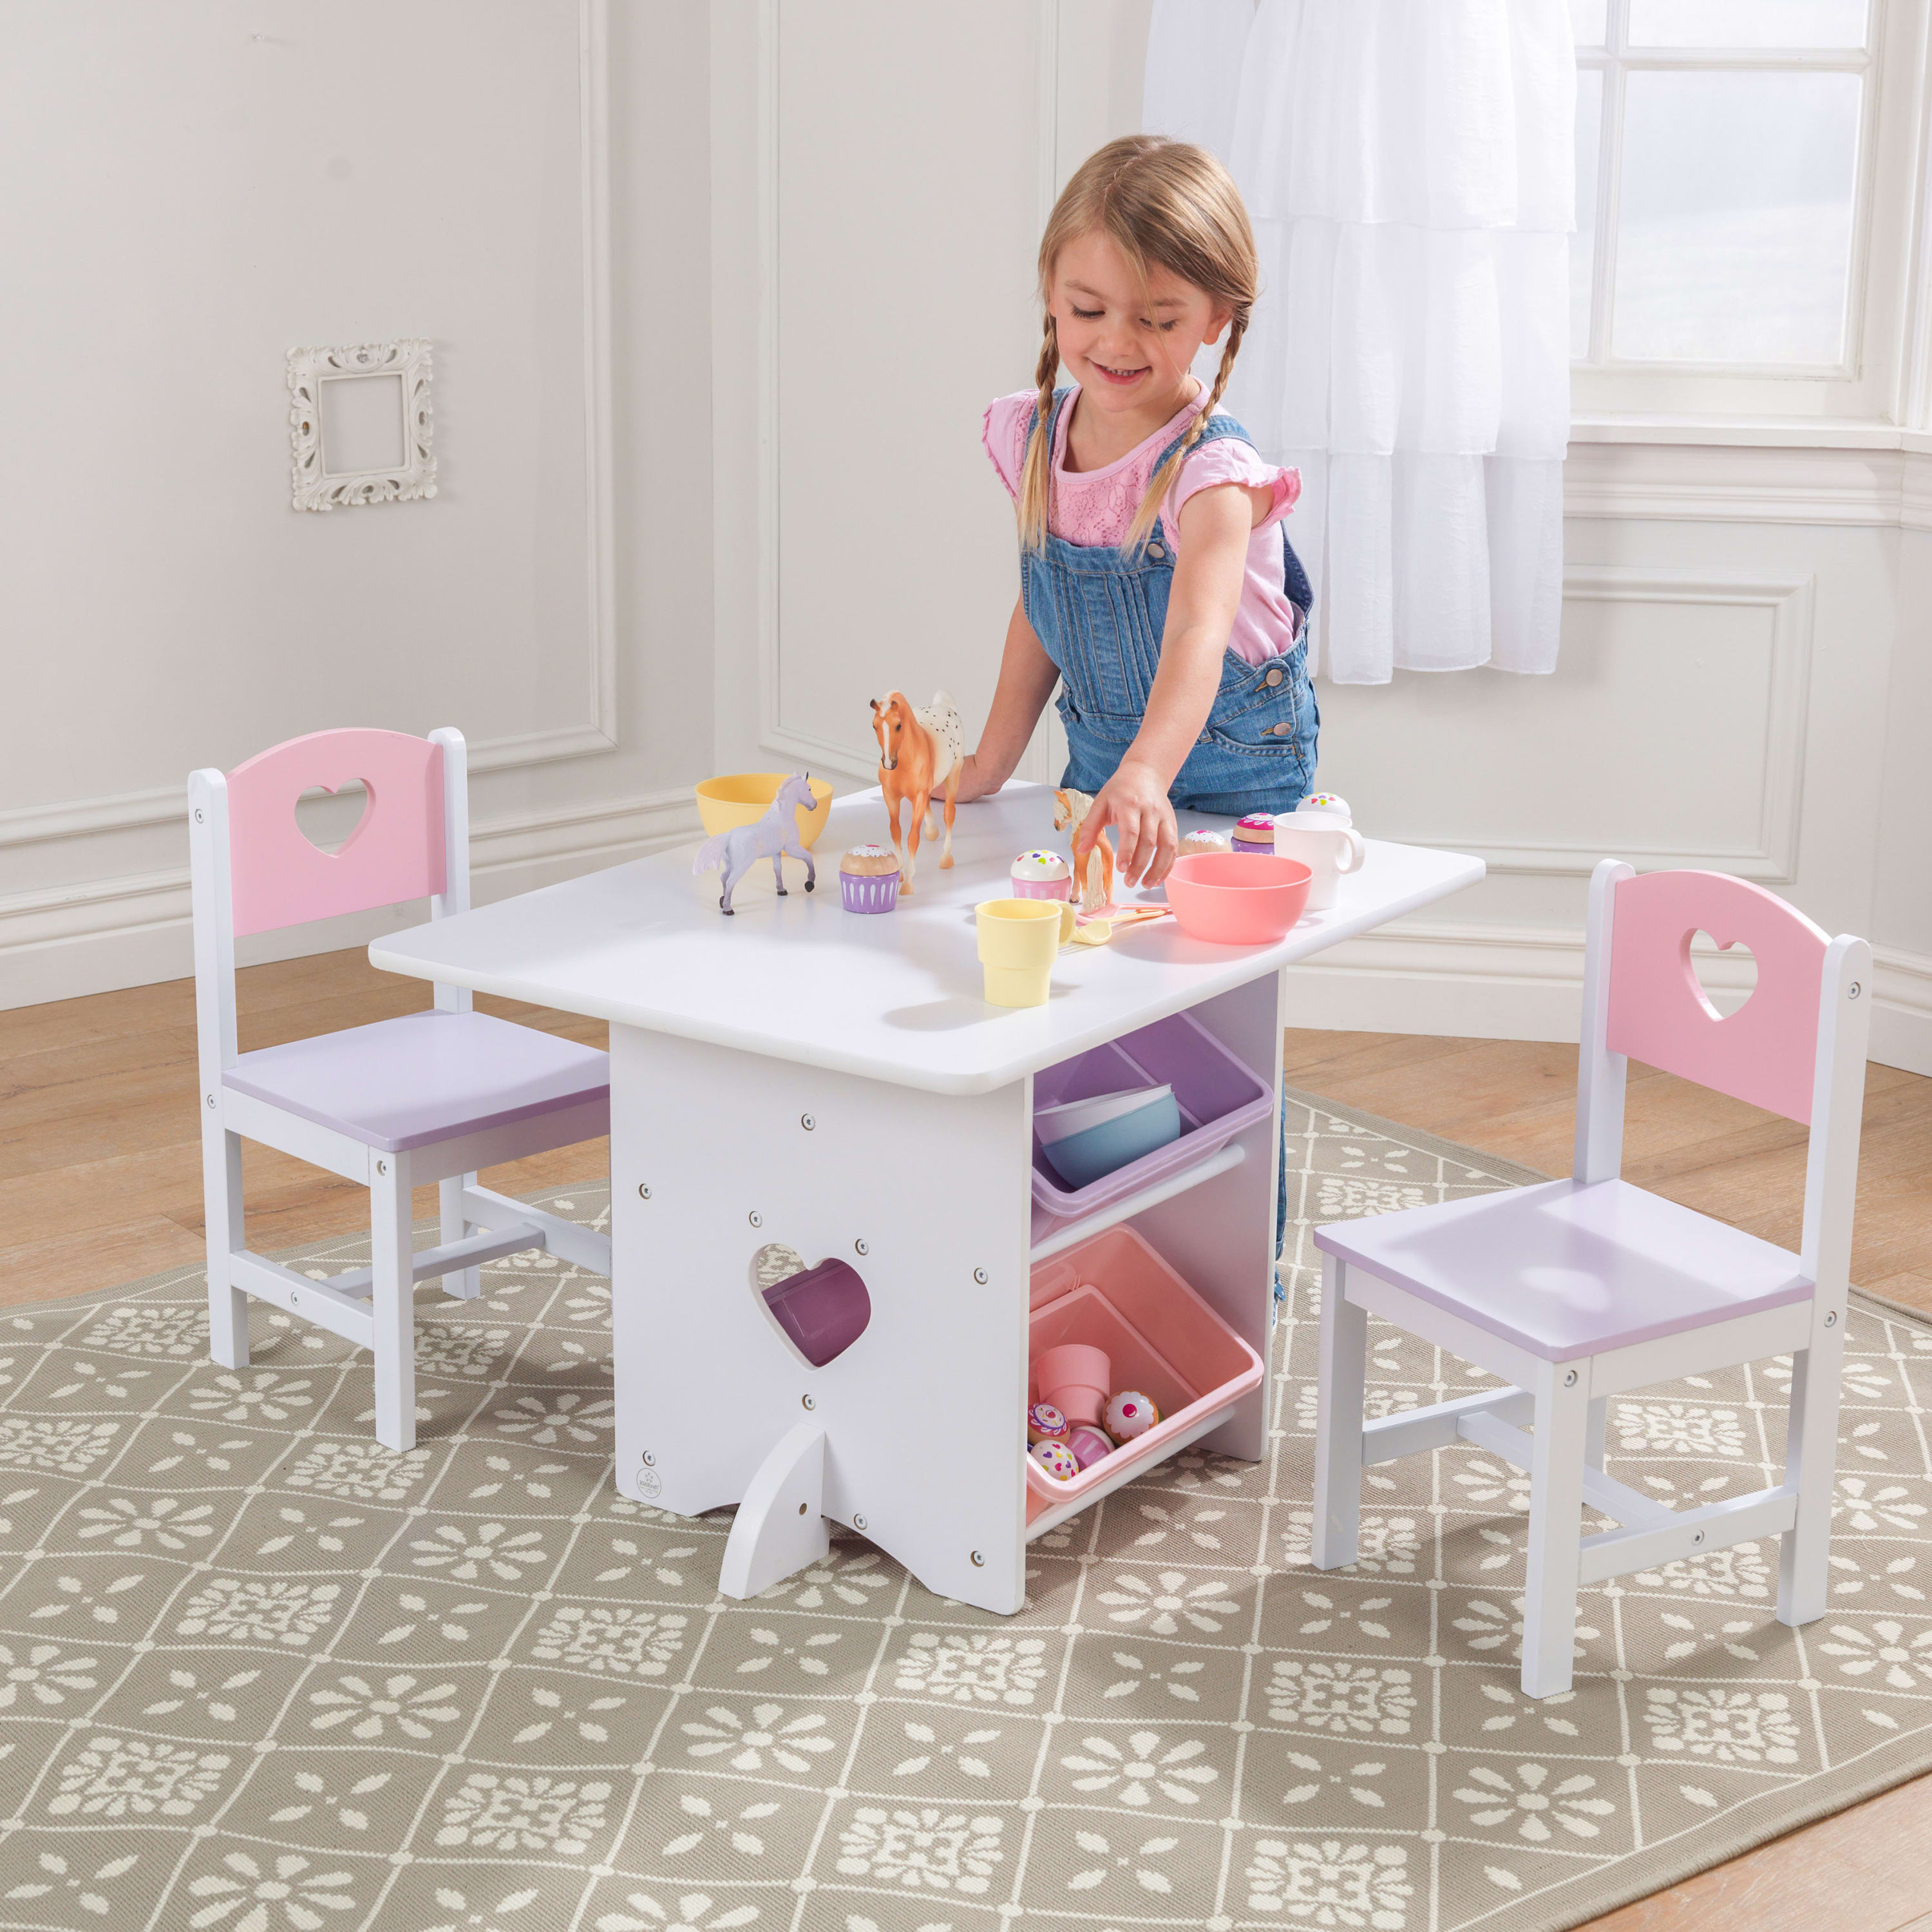 KidKraft Wooden Heart Table & Chair Set with 4 Bins, Pink, Purple & White, for Ages 3+ - image 2 of 7